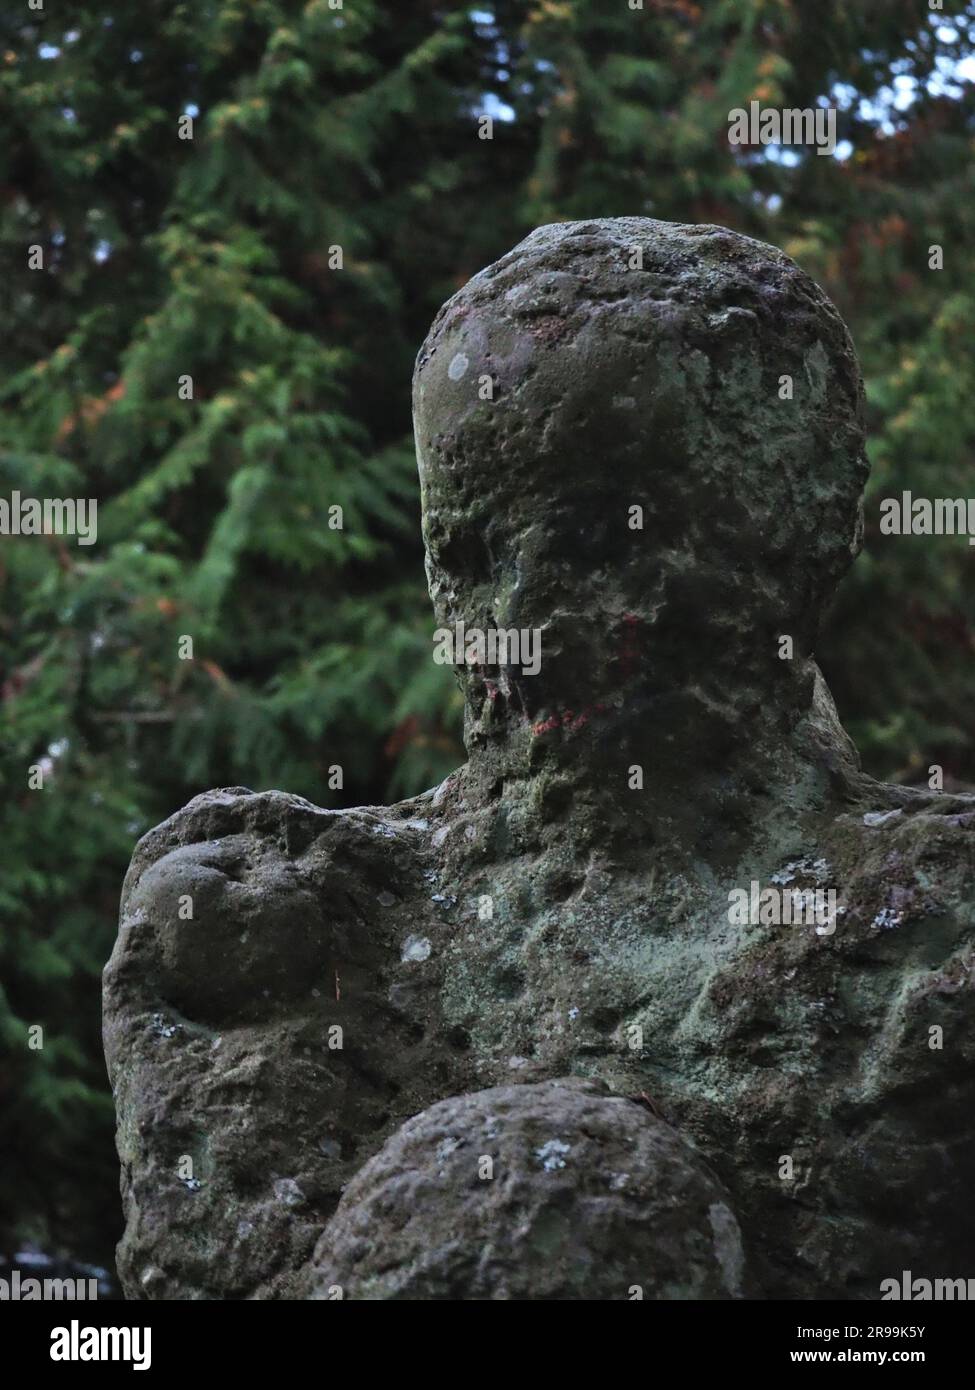 Closeup photo of destroyed statue showing all its imperfections. The contrast between beauty of the nature in the background and the damaged stone. Stock Photo